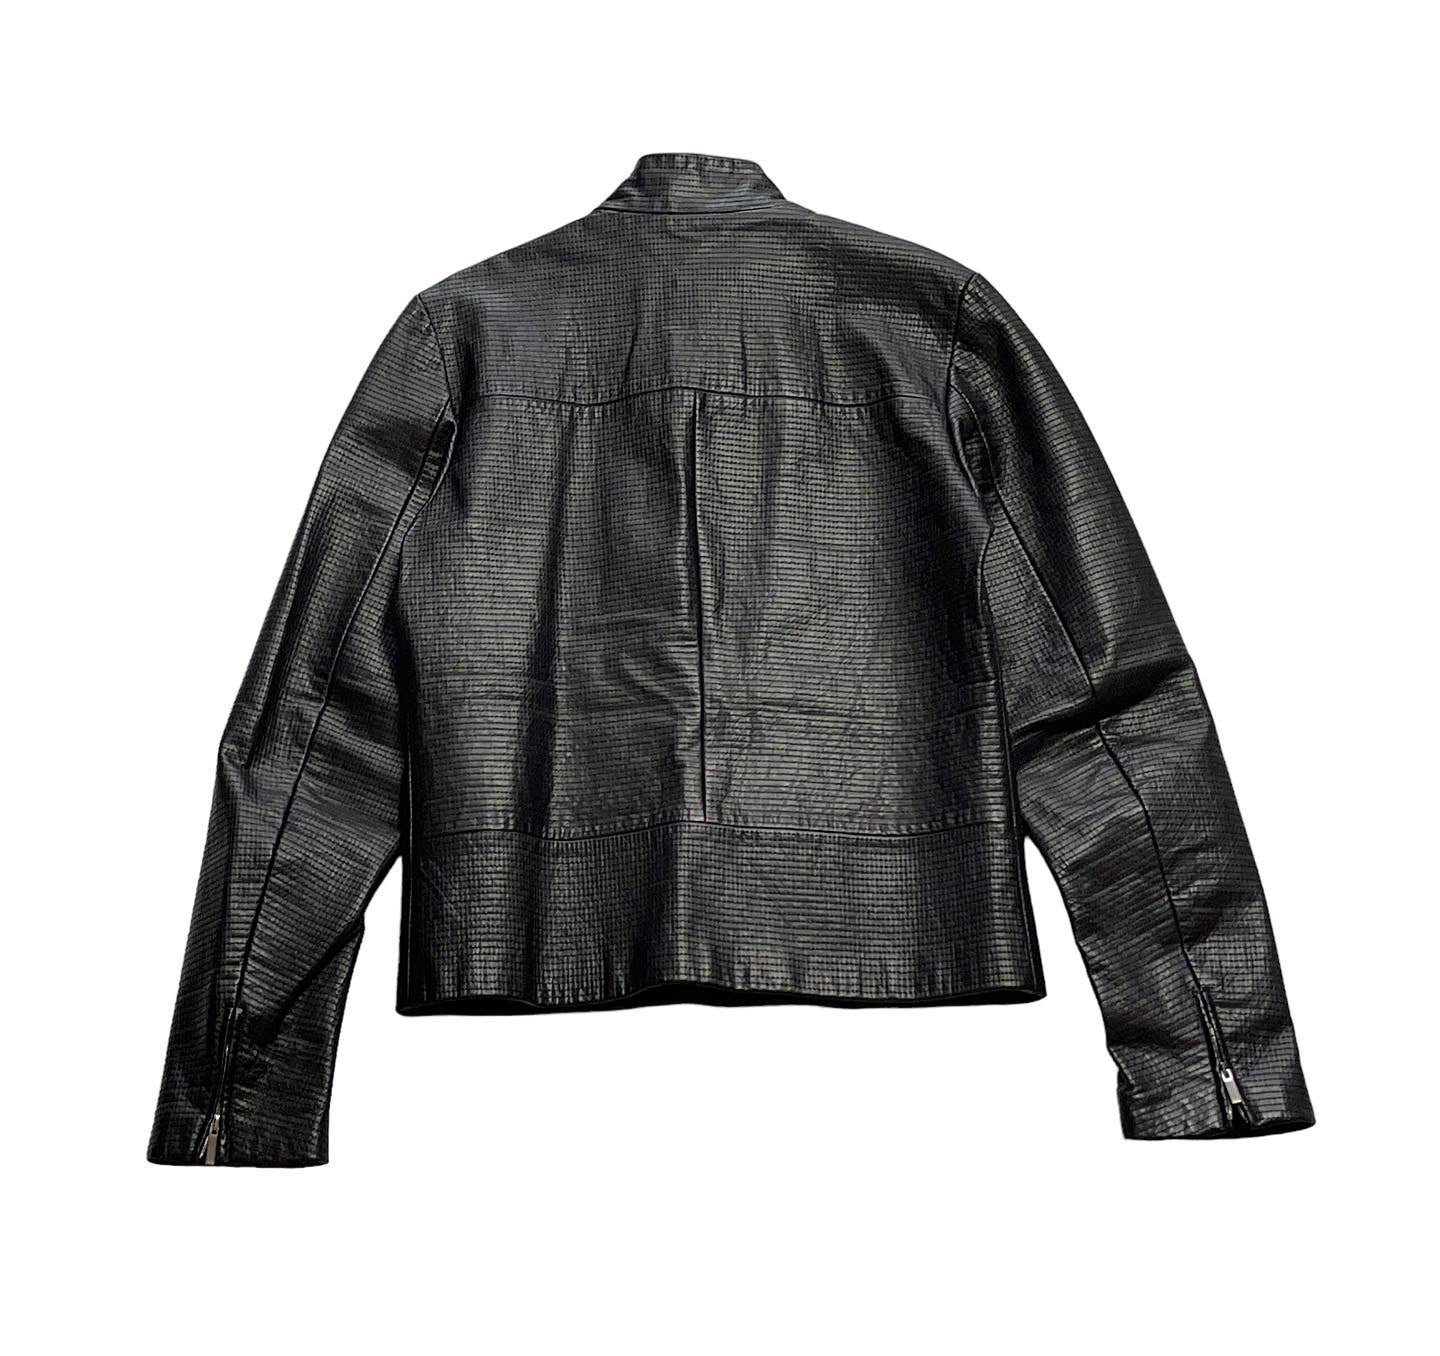 Dior Homme SS02 'Boys Don't Cry' Stitched Lambskin Jacket